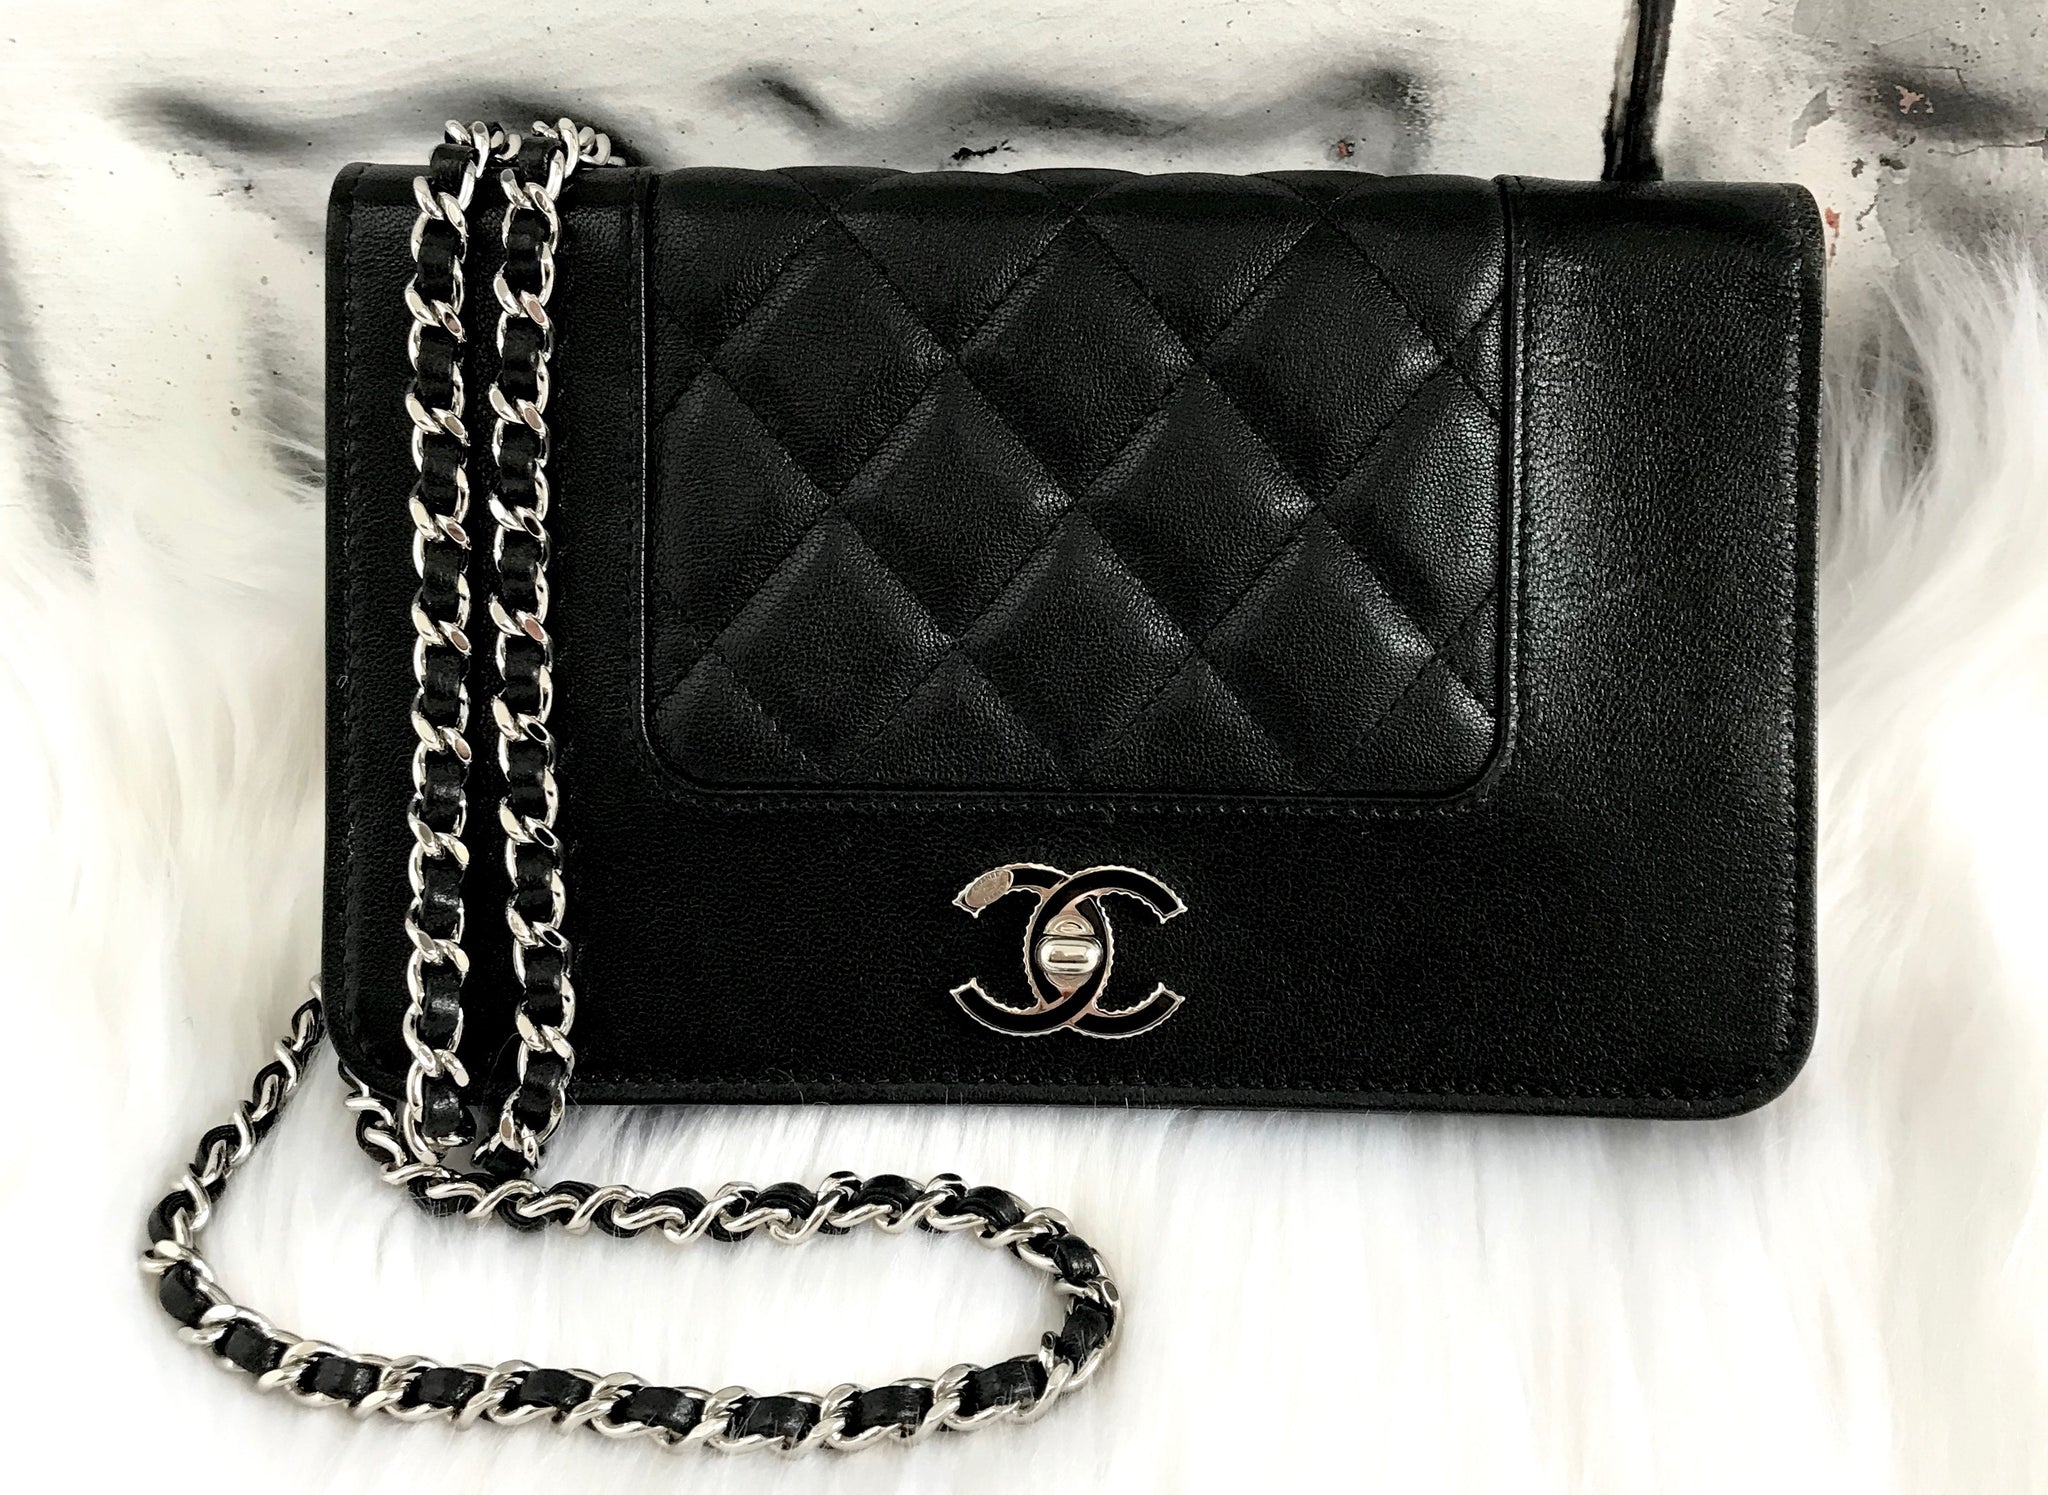 BLACK LEATHER AND SILVER-TONE METAL BOY BAG, CHANEL, A Collection of a  Lifetime: Chanel Online, Jewellery